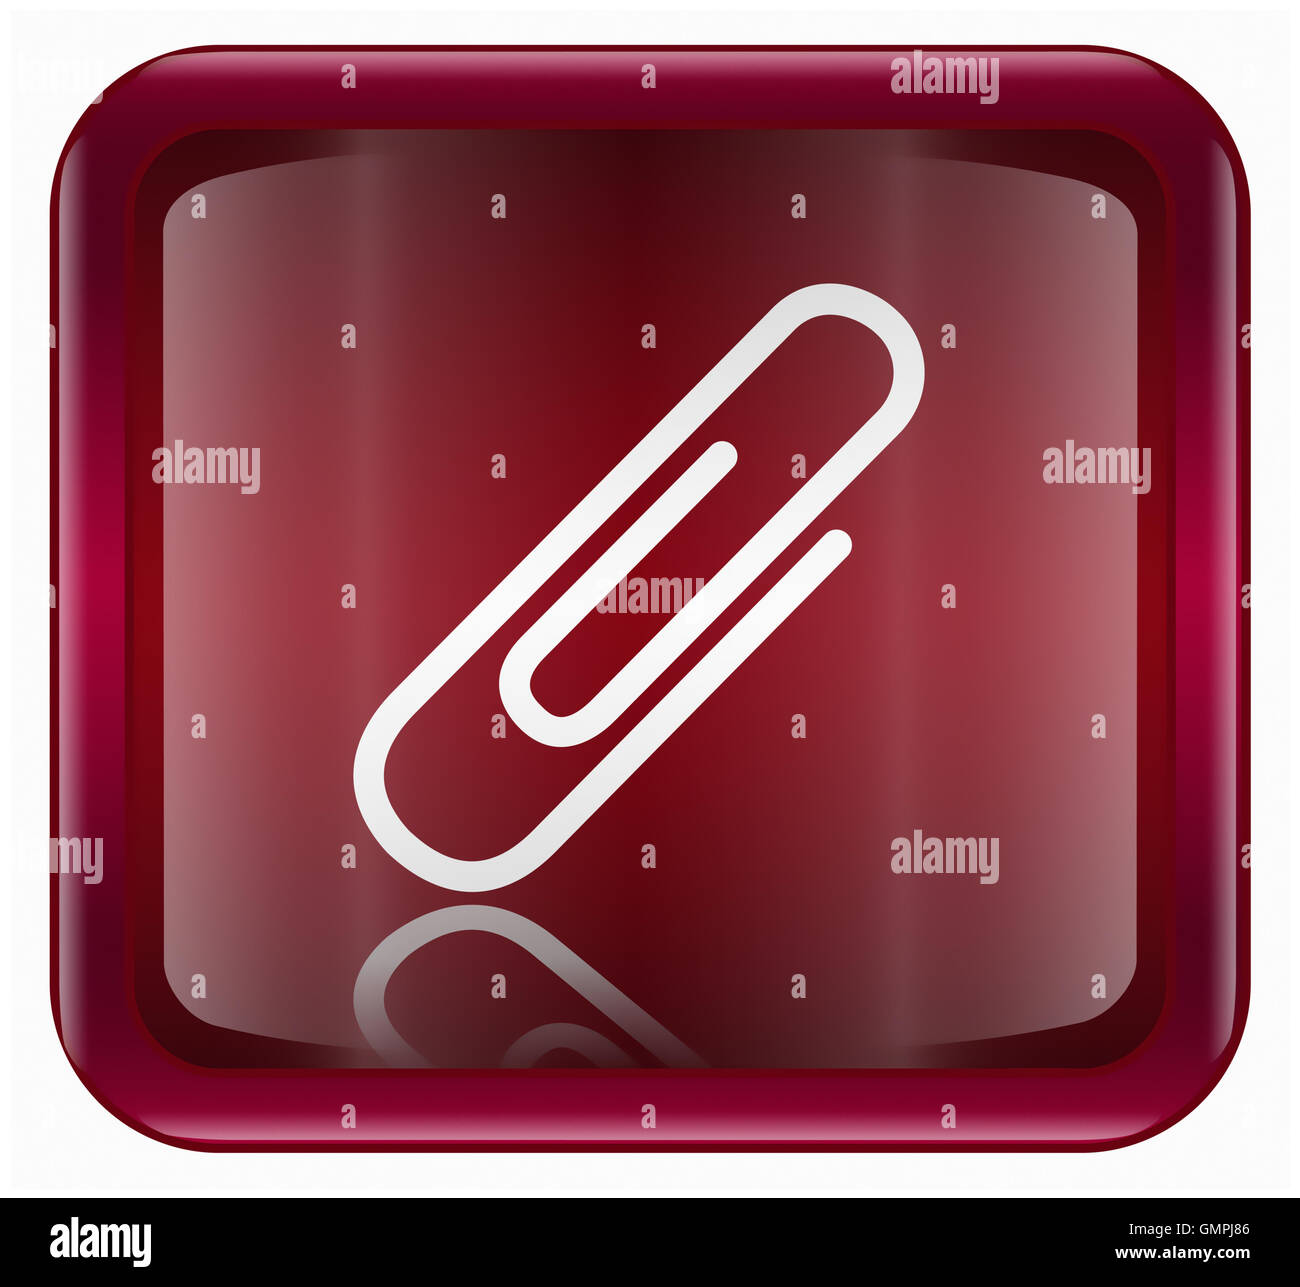 Paper clip icon dark red, isolated on white background Stock Photo